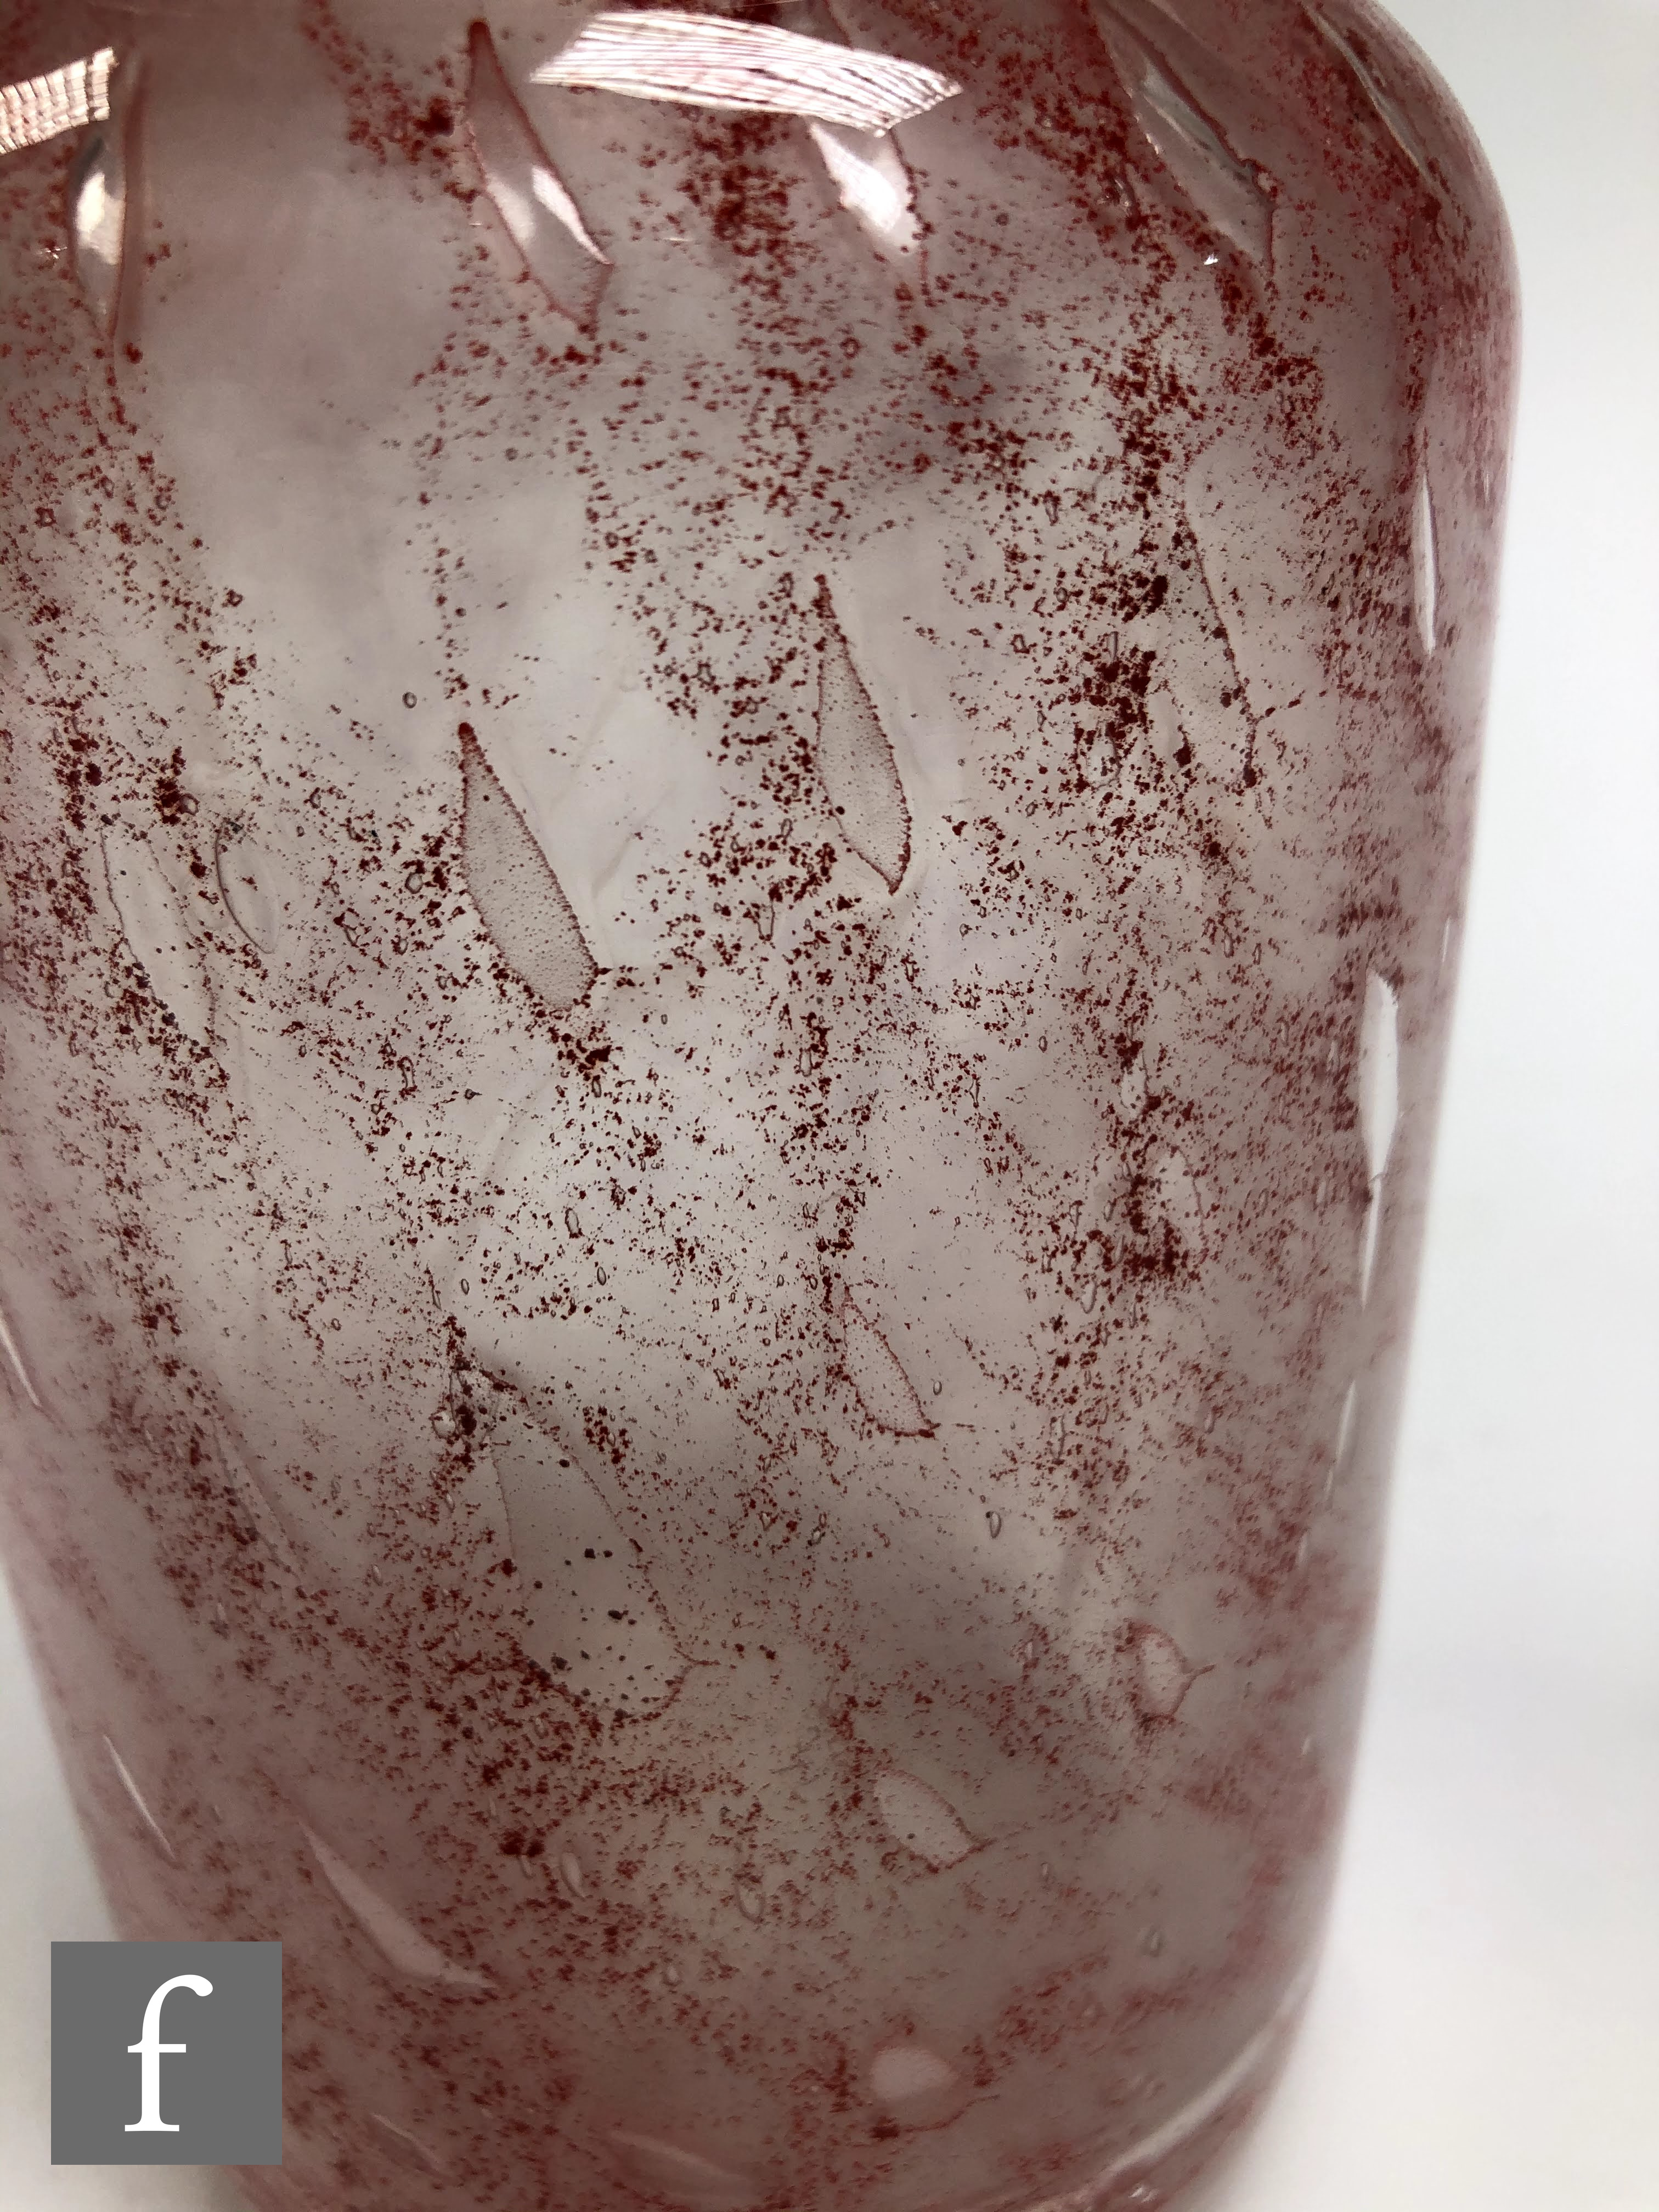 Four pieces of mid-century glass comprising an Ercole Barovier barrel vase in red with airbubble - Image 4 of 6